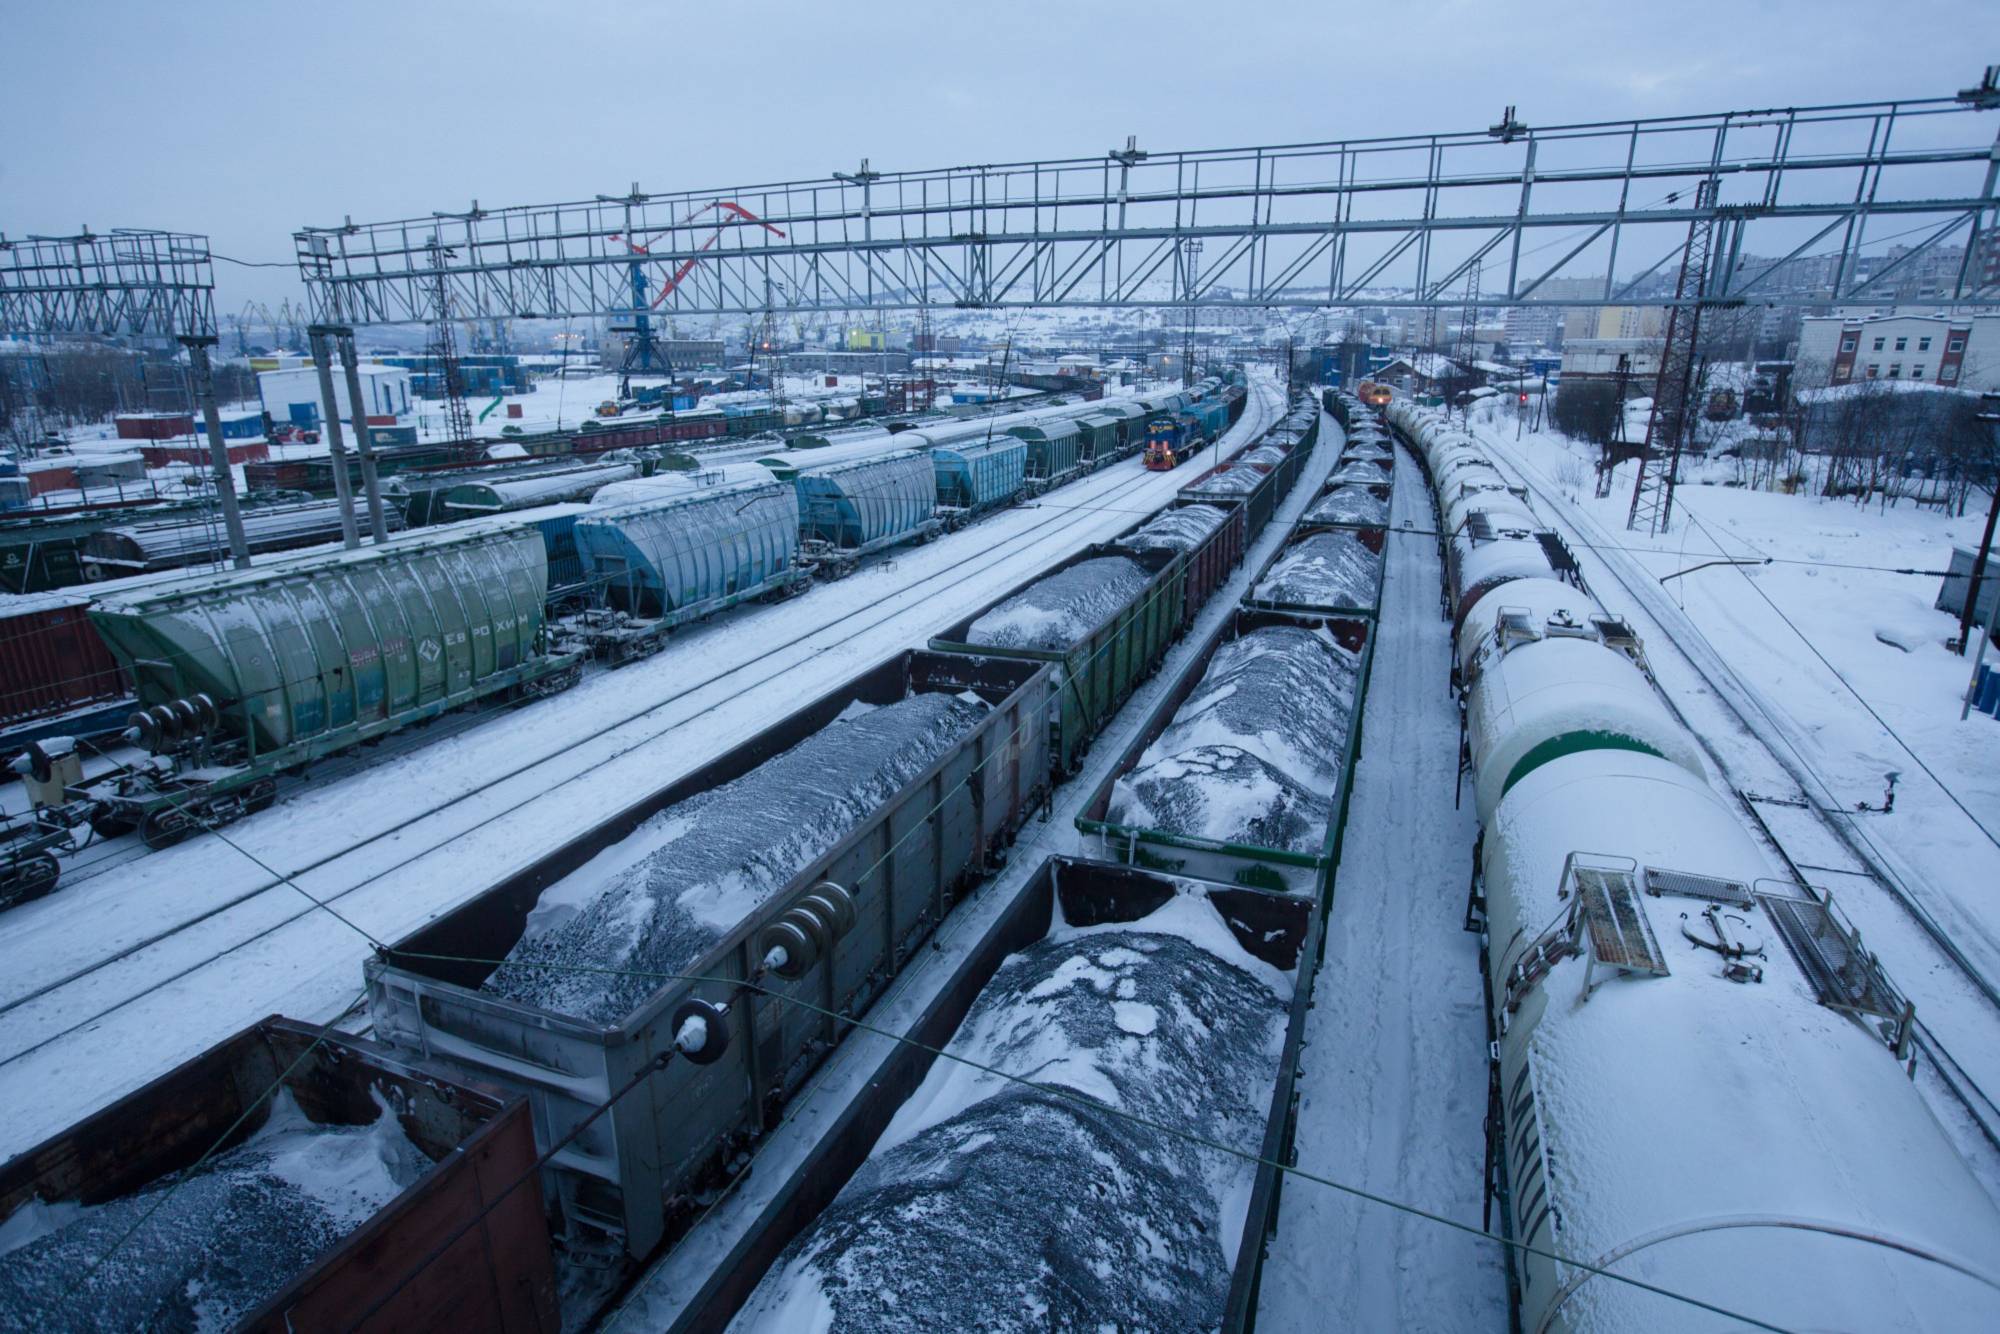 Russia is at the center of a rail cargo route from China supplying Western arms manufacturers with a steady supply of rare metals used in modern weaponry. | BLOOMBERG